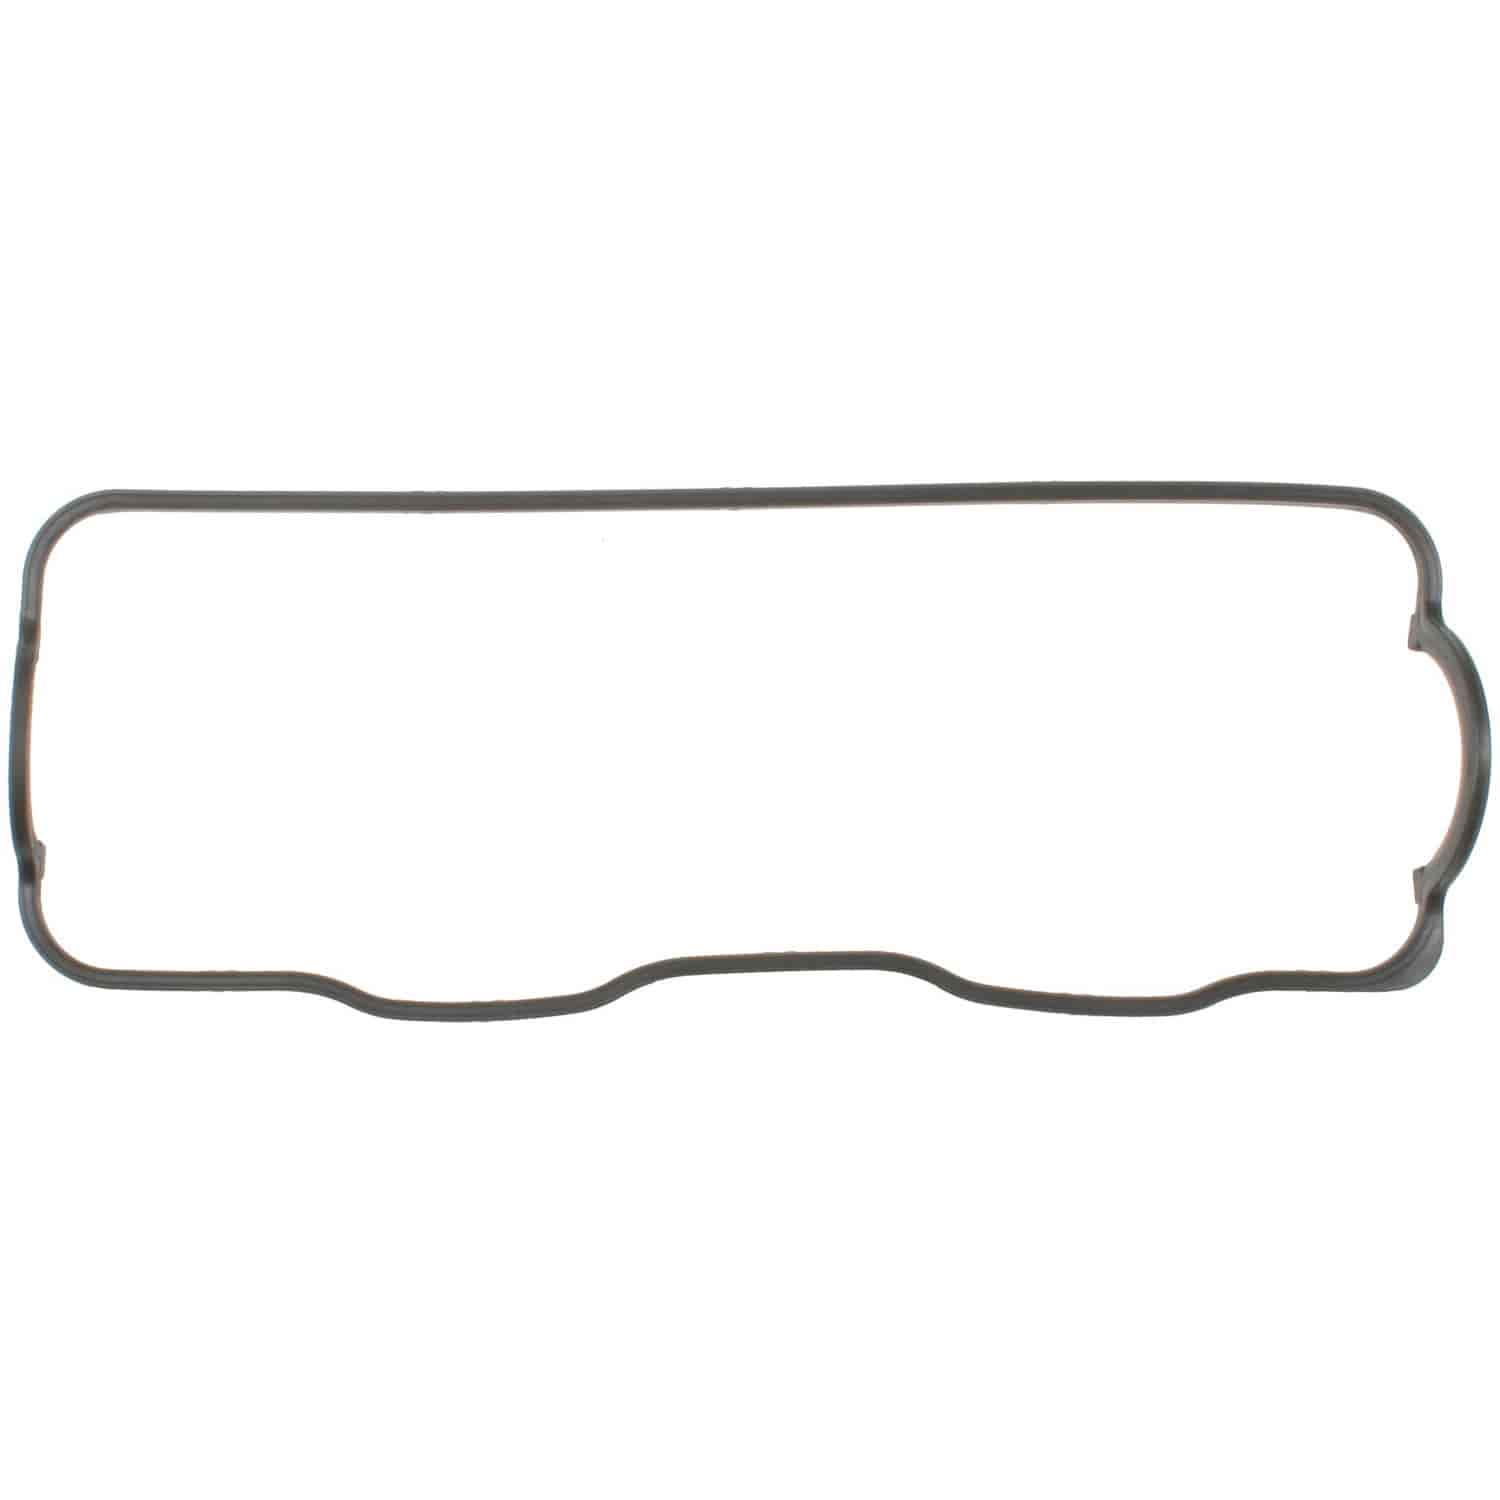 Valve Cover Gasket Toy 1456 3EE 1990-1994